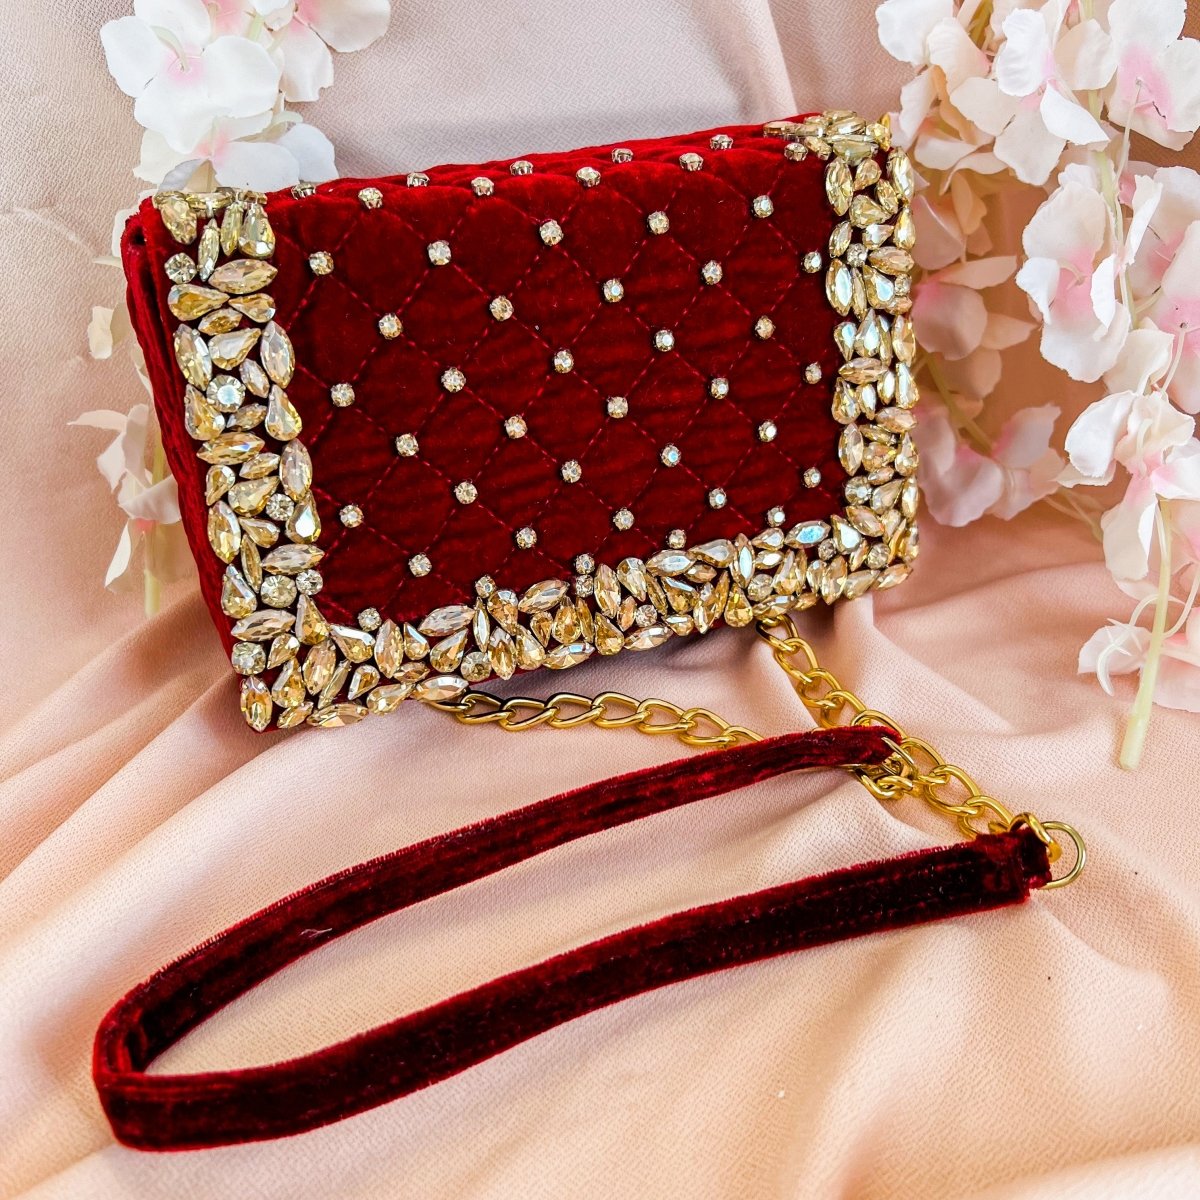 Glitter, Shiny, Luxury, Glamorous, Elegant, Exquisite Elegant Velvet Clutch  Evening Bag For Women Formal Wedding Party Clutch Purse For Girls, Women,  College Students, Rookies & White-collar Workers For Party, Prom, Wedding |